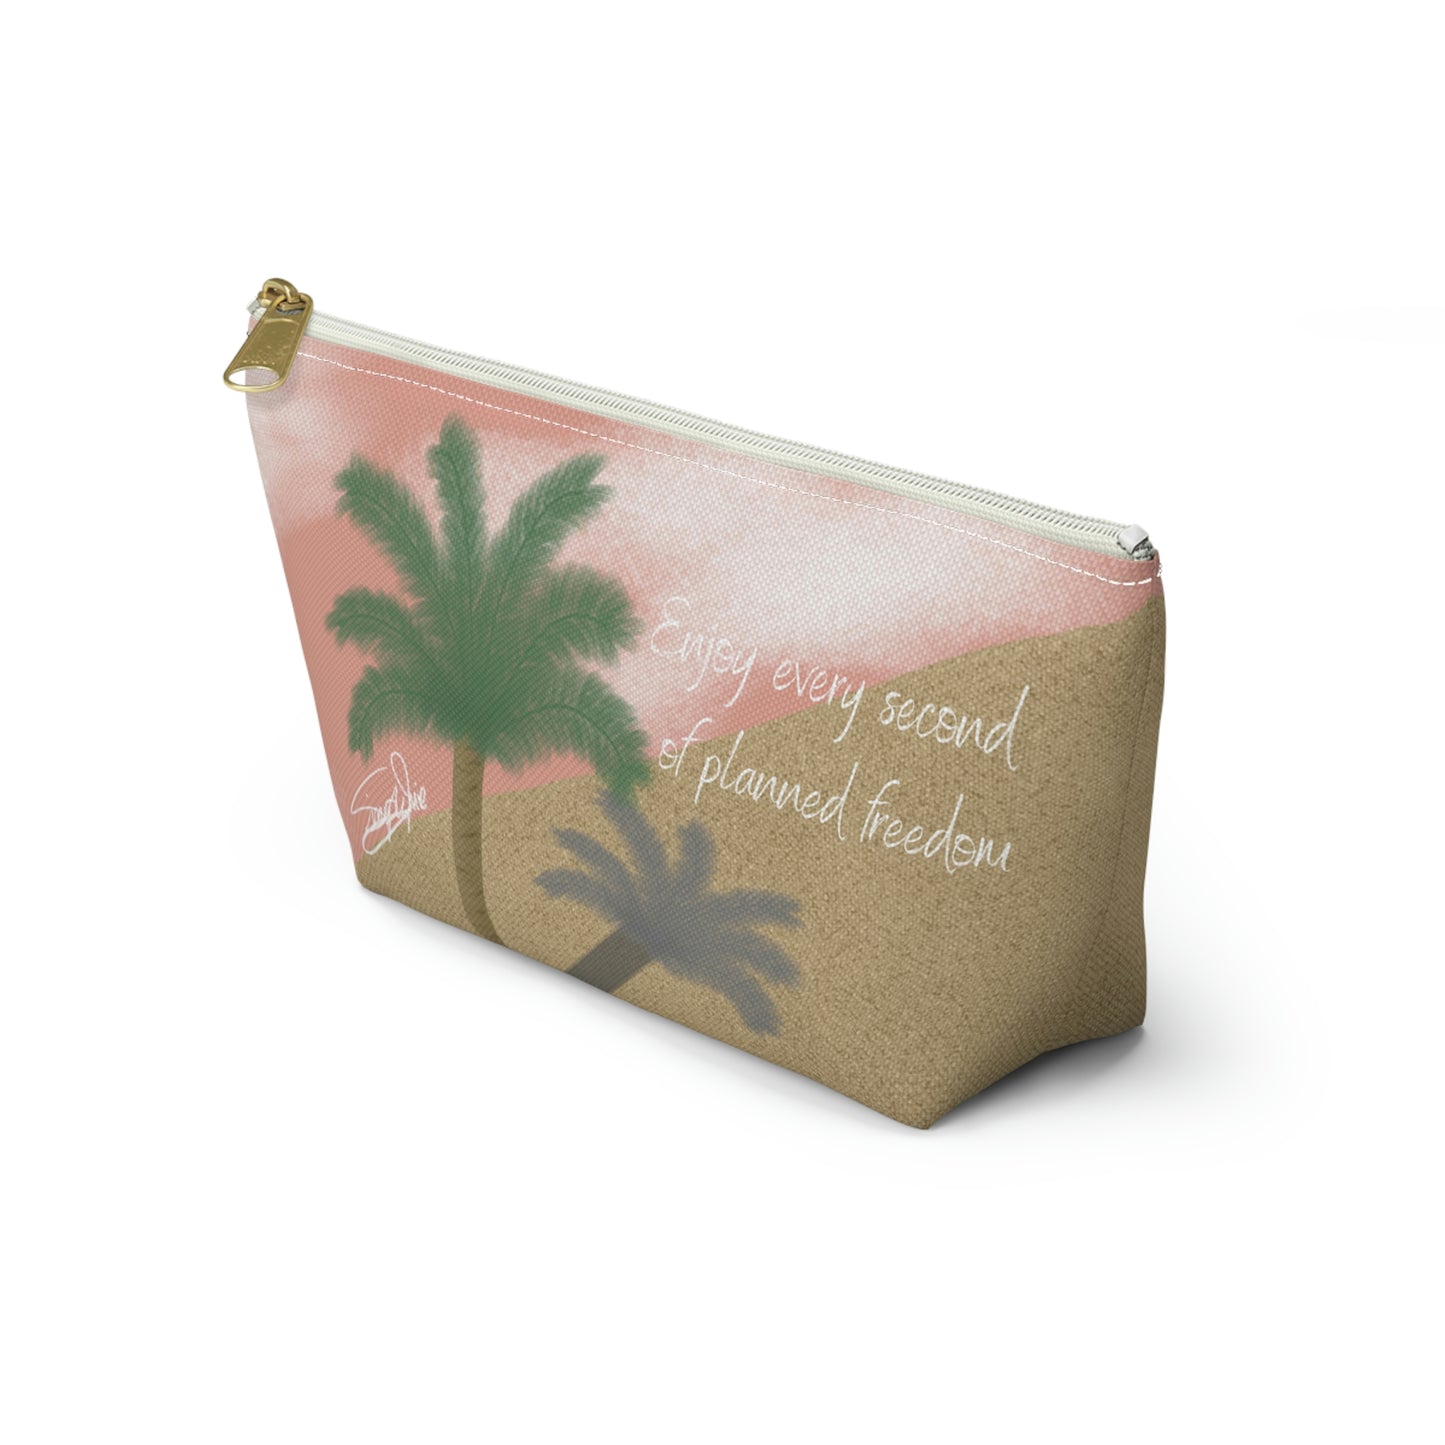 Enjoy every second of planned freedom - T-bottom Accessory Pouch